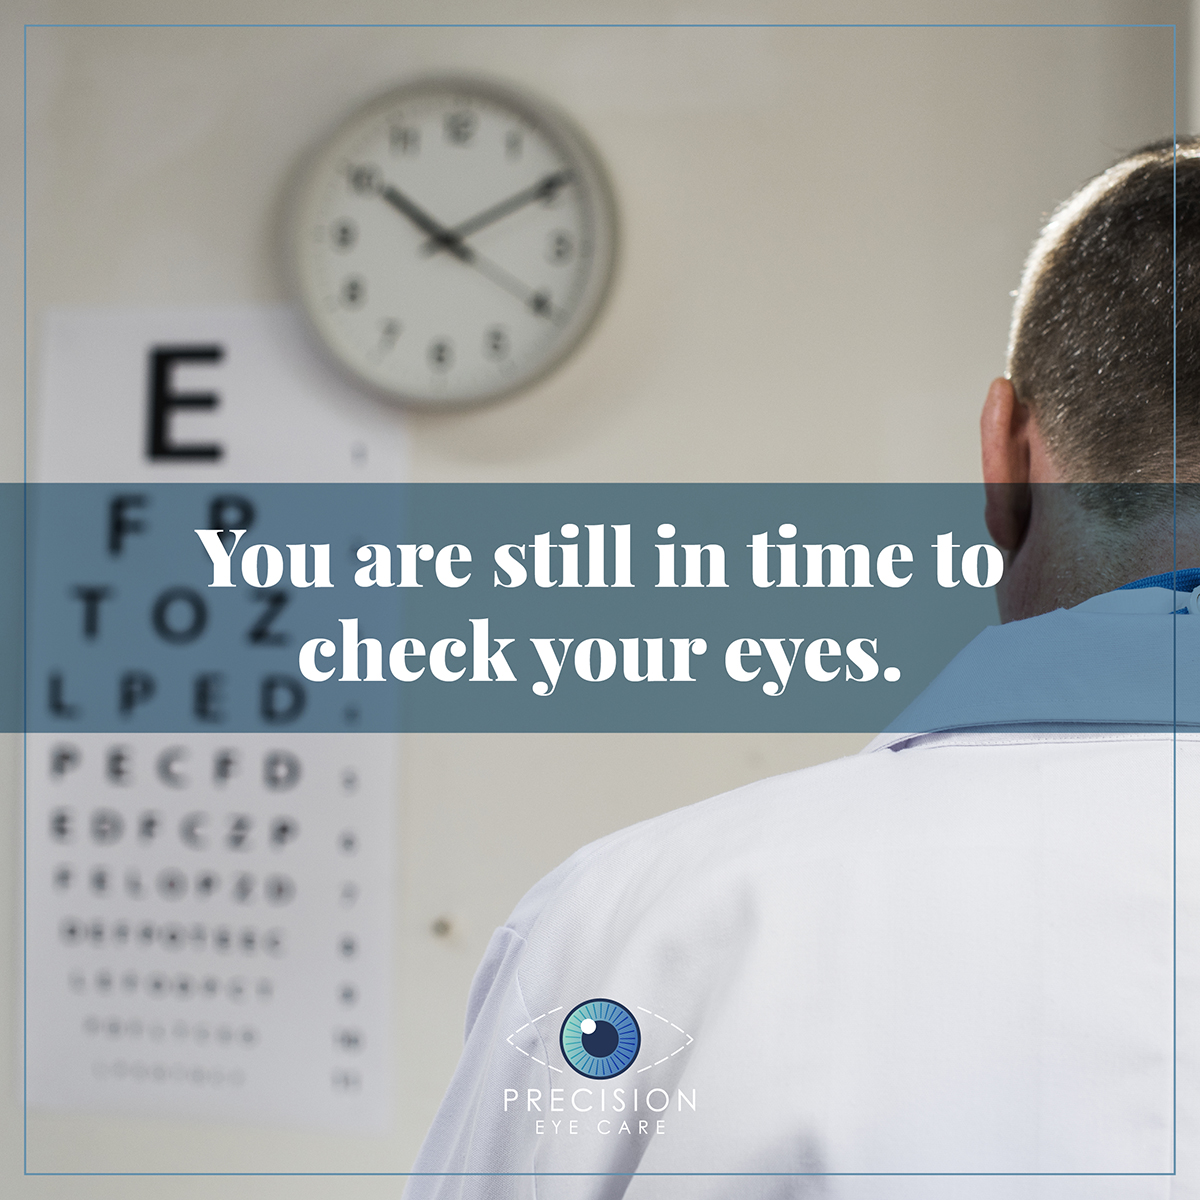 You are still in time to check your eyes.